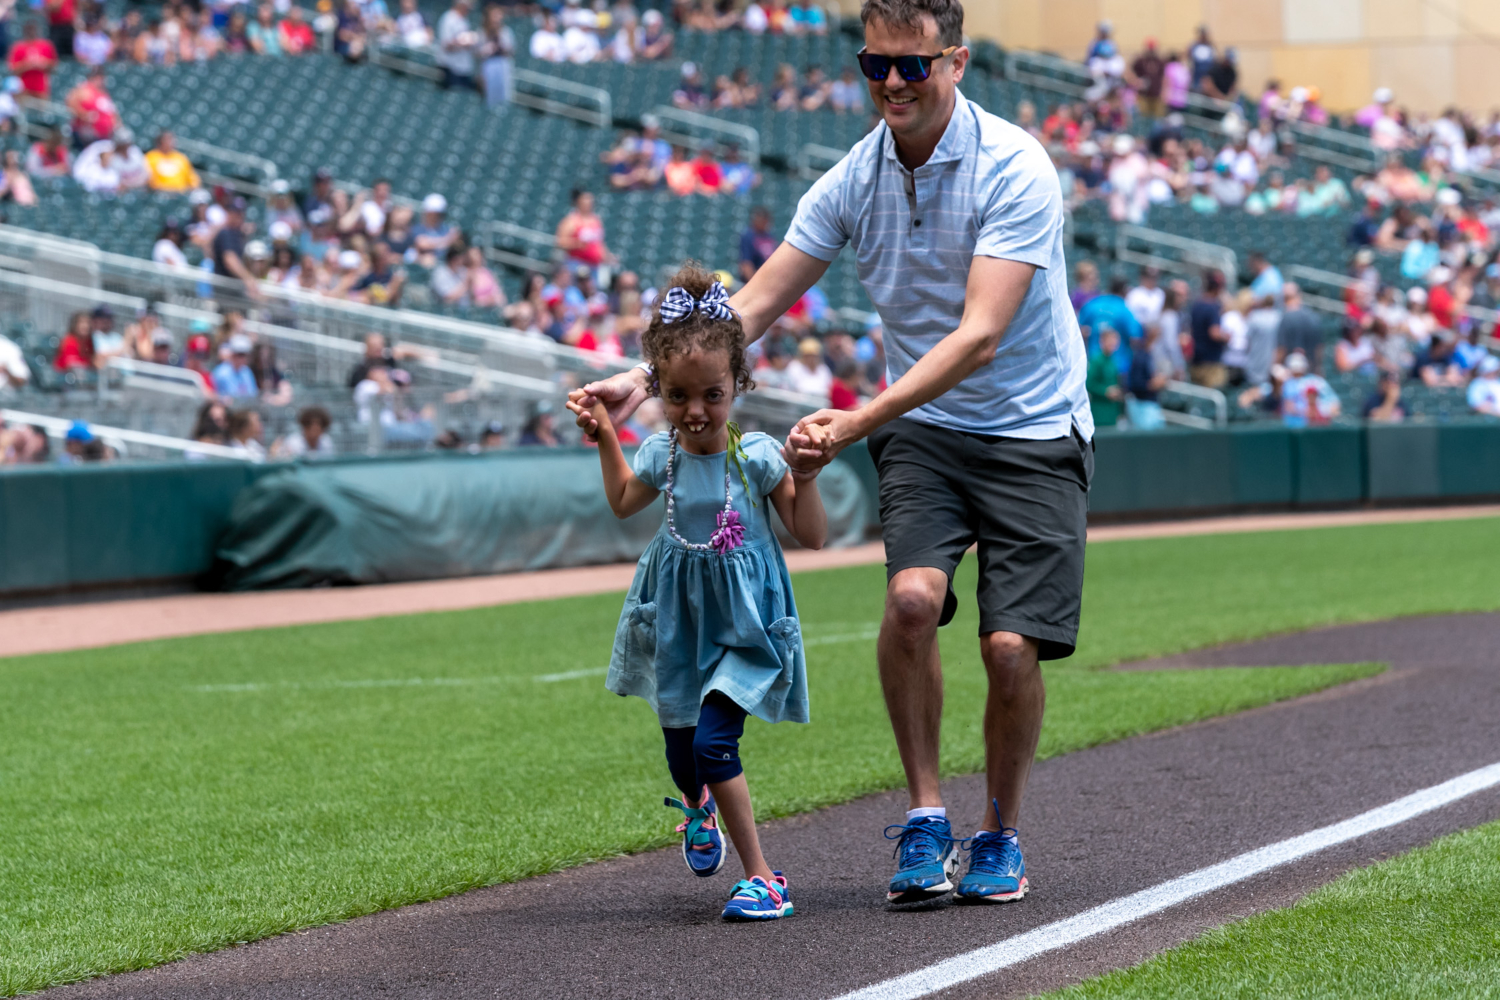 Peyton and her father run towards home plate at Target field